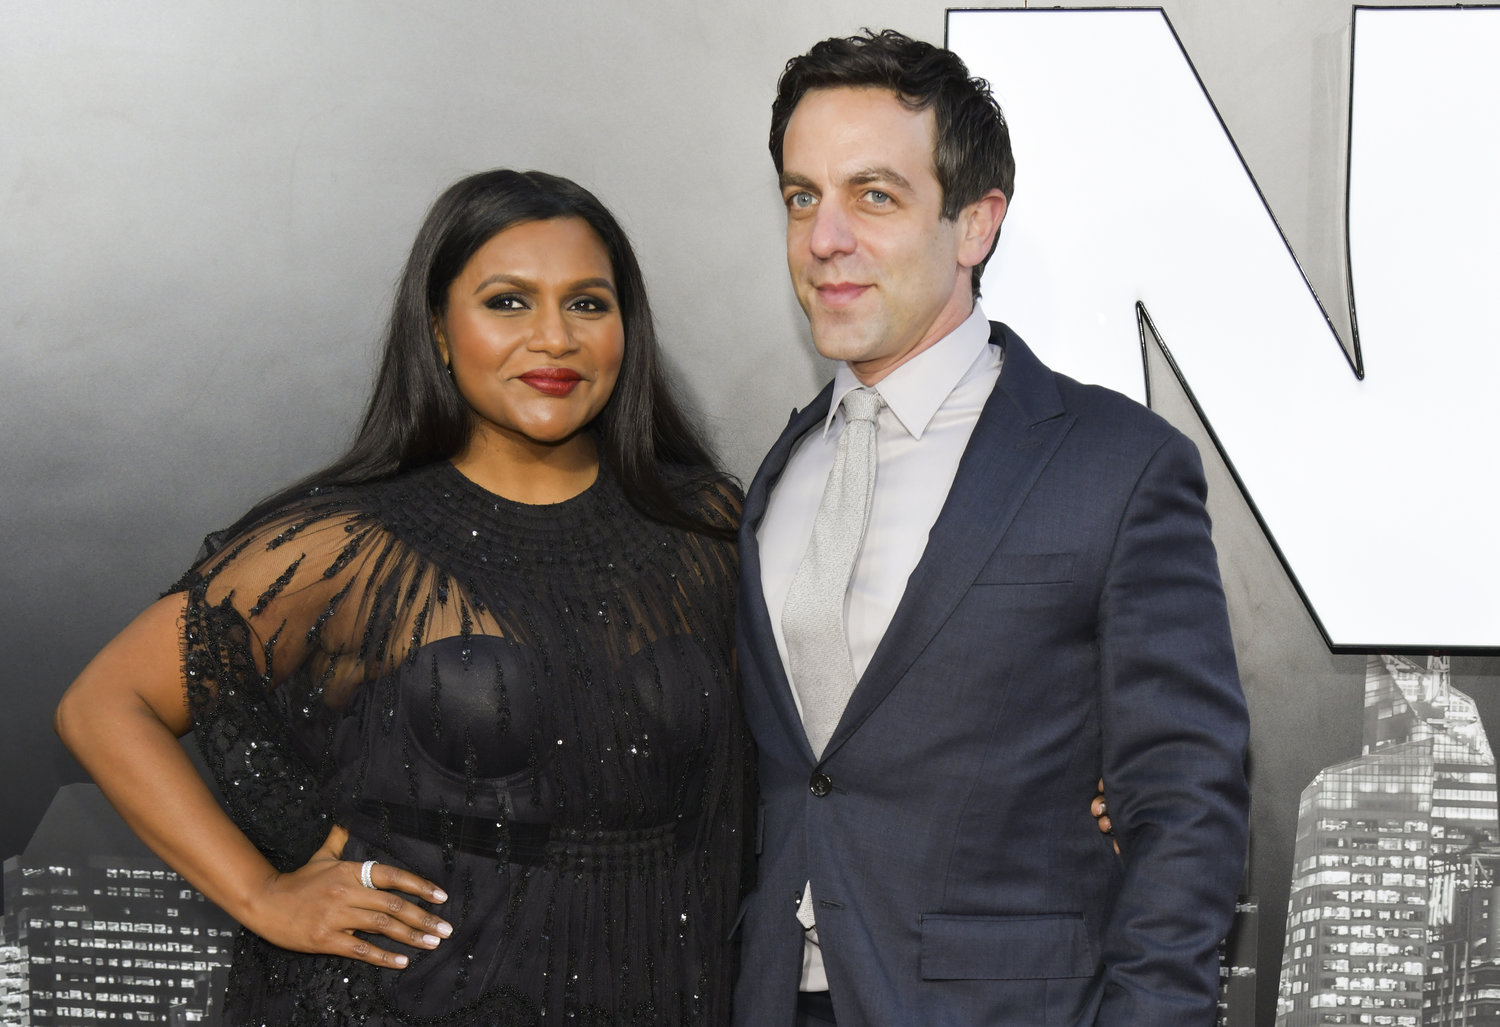 Mindy Kaling and BJ Novak at the premiere of 'Late Night'